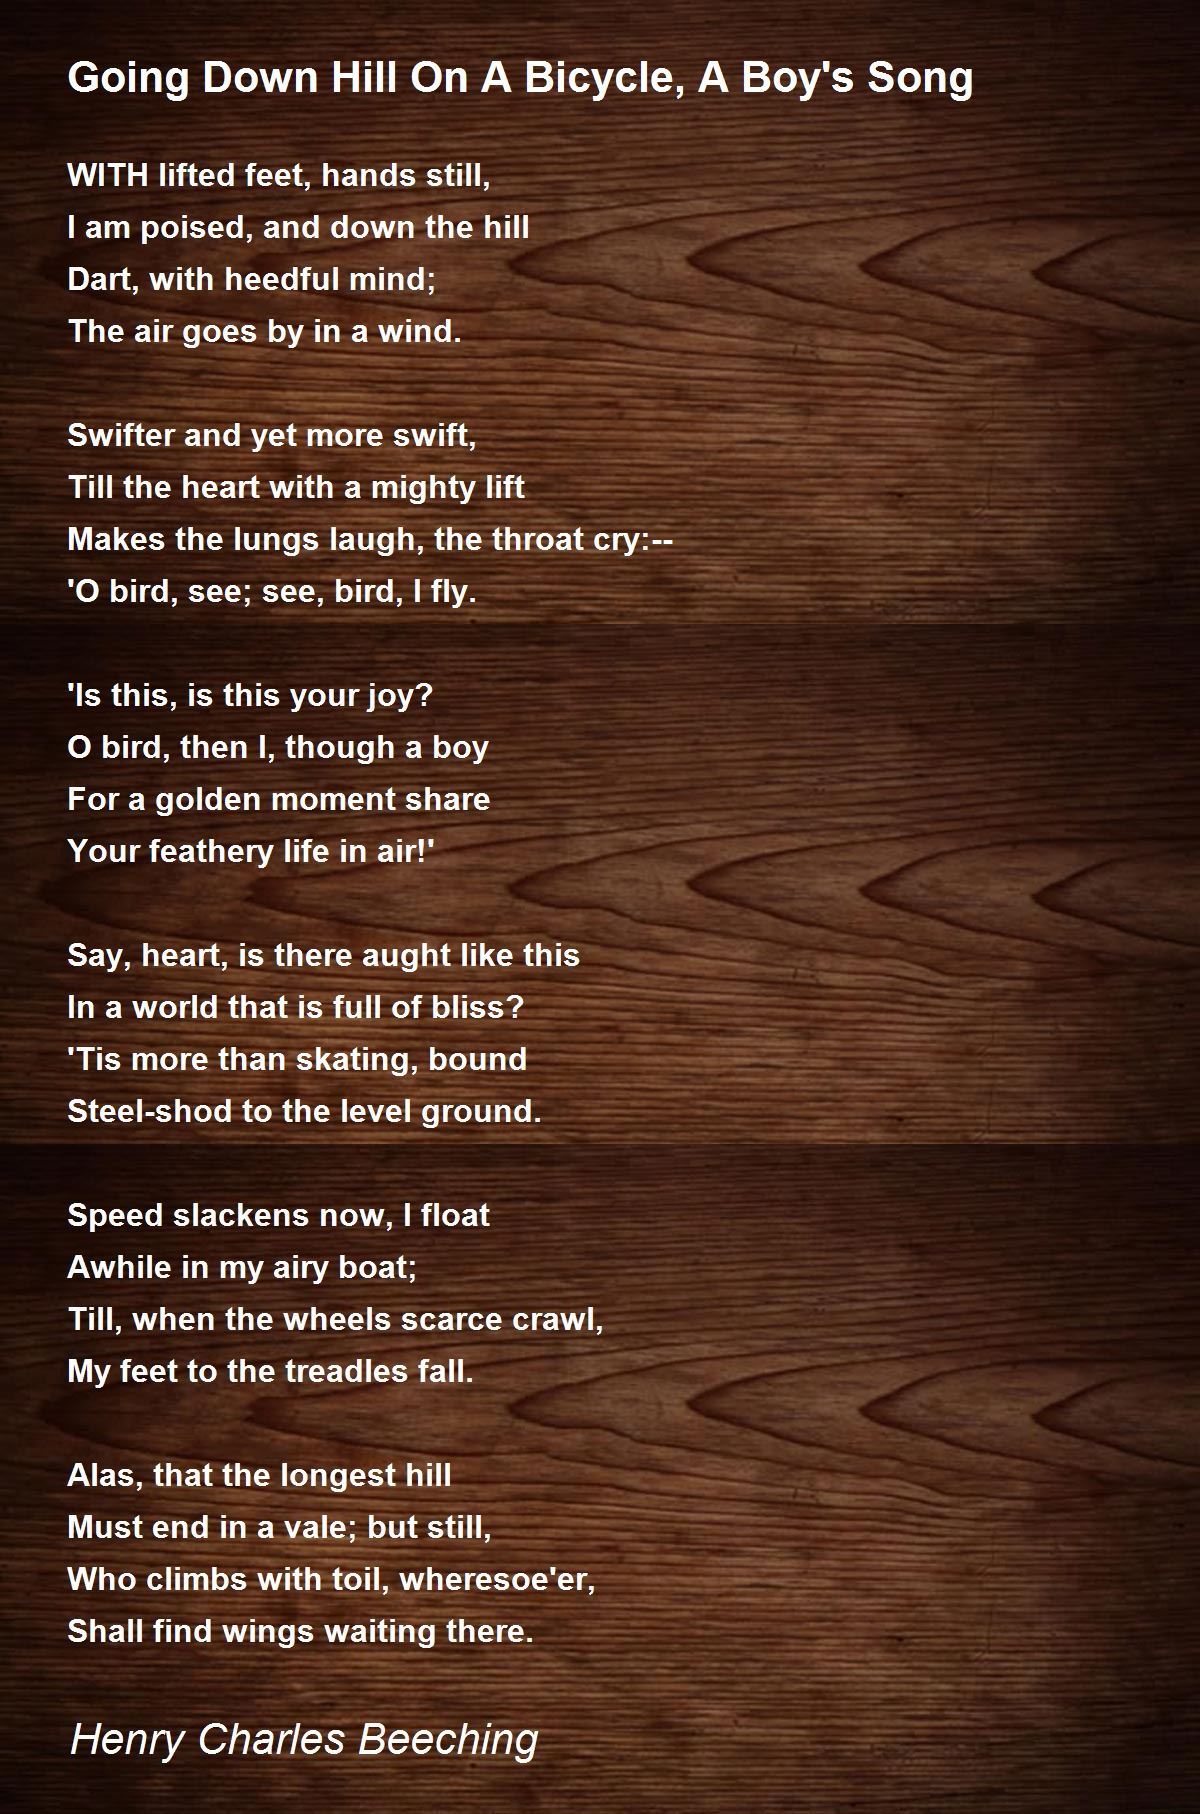 Downhill On A Bicycle Poem Summary / Going Downhill On A Bicycle Poem ... - Going Down Hill On A Bicycle A Boy S Song